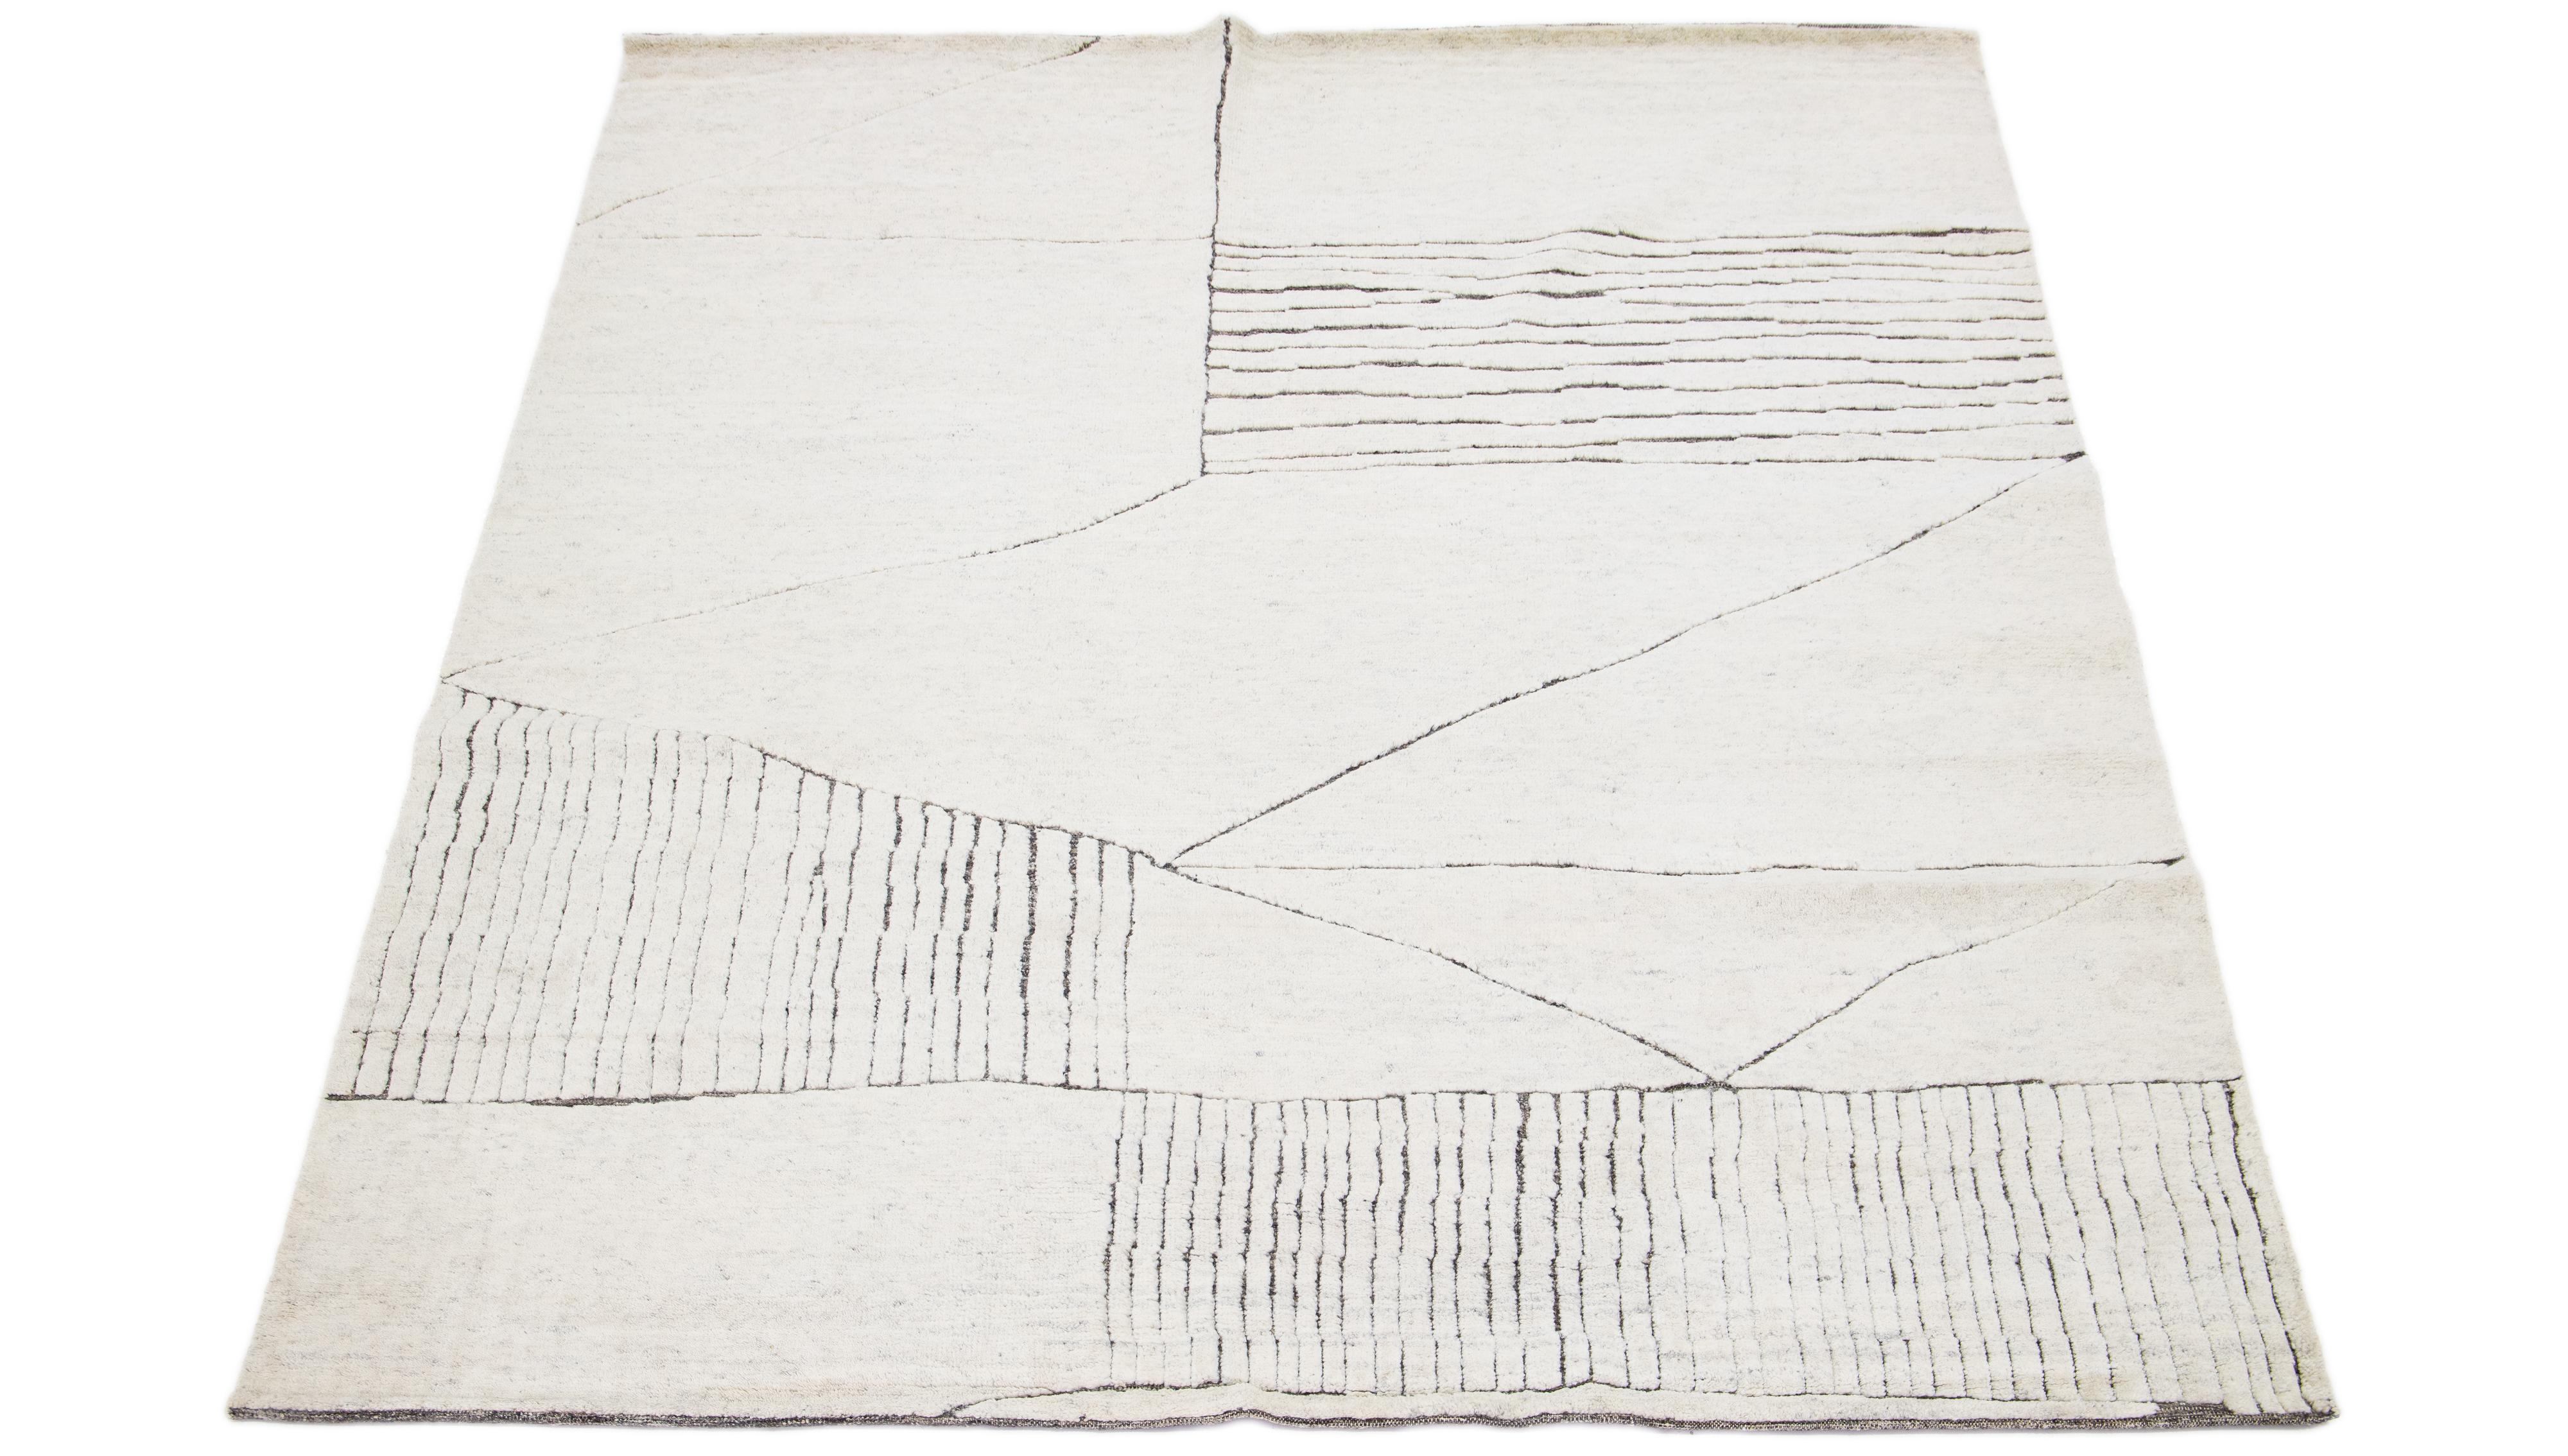 This luxurious wool rug features a timeless Moroccan pattern in a contemporary abstract Minimalist style, utilizing beige tones to create a sleek and modern look. It is crafted using traditional hand-knotting techniques, ensuring exceptional quality